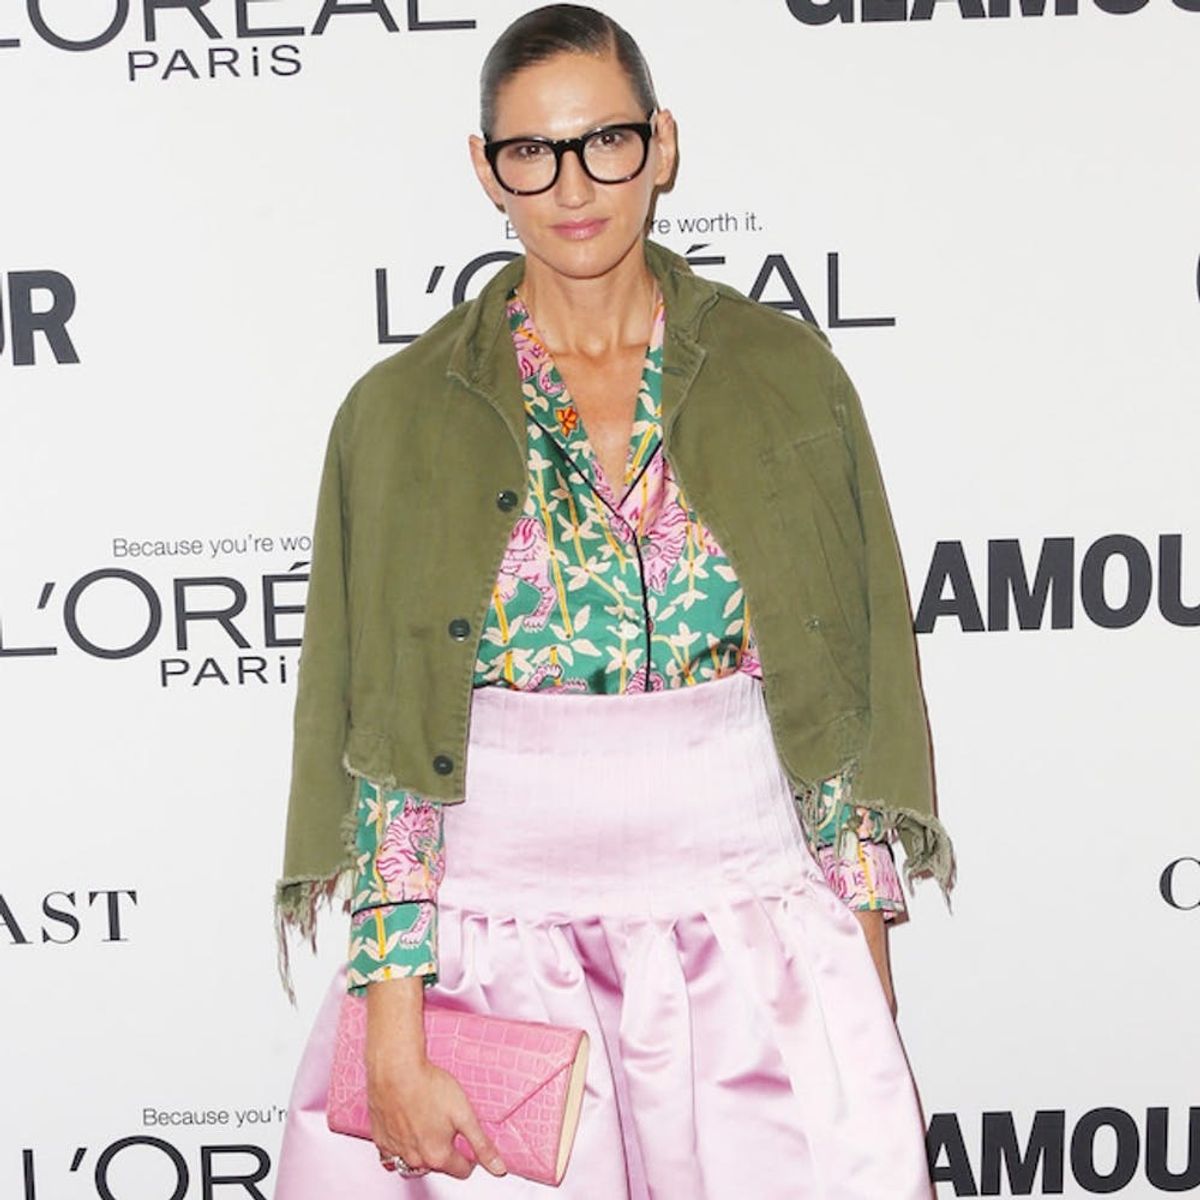 Here’s What Jenna Lyons Should Do After Leaving J. Crew